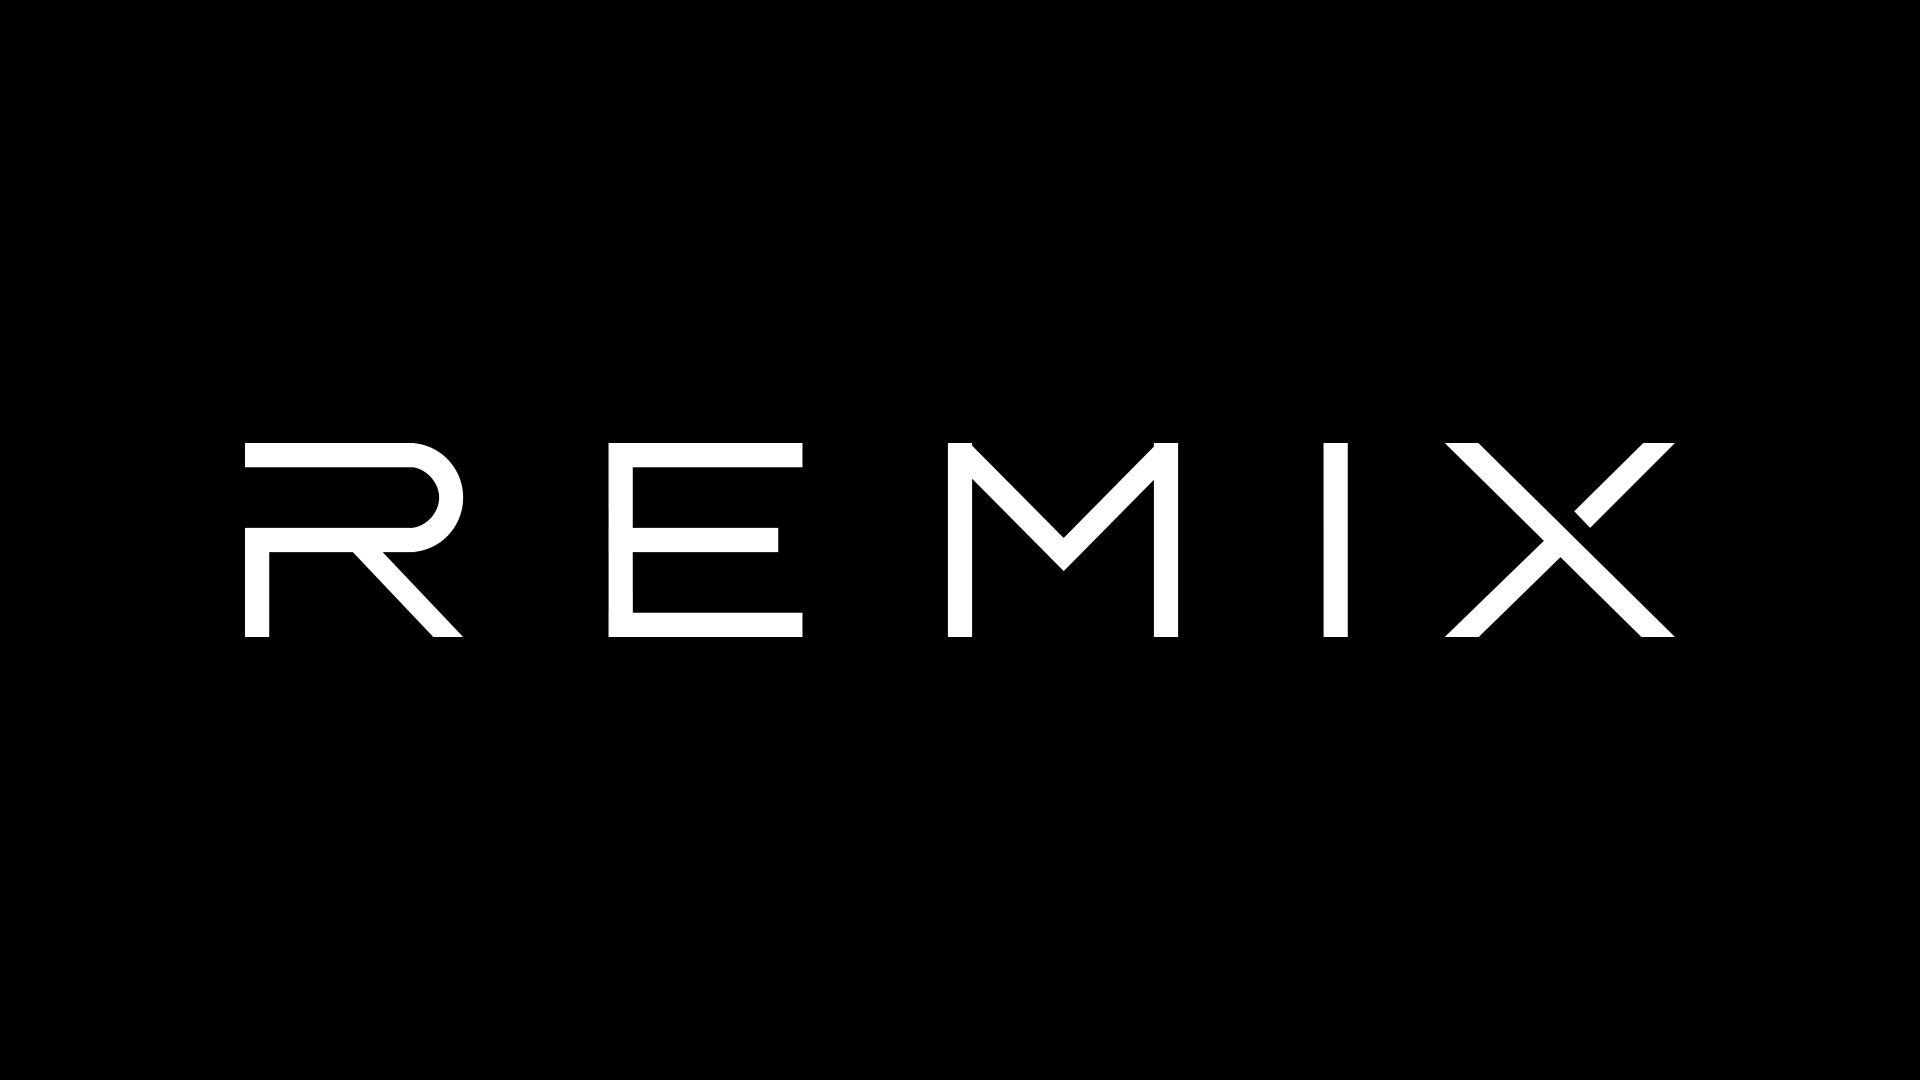 Remix Logo PNG Vector (EPS) Free Download